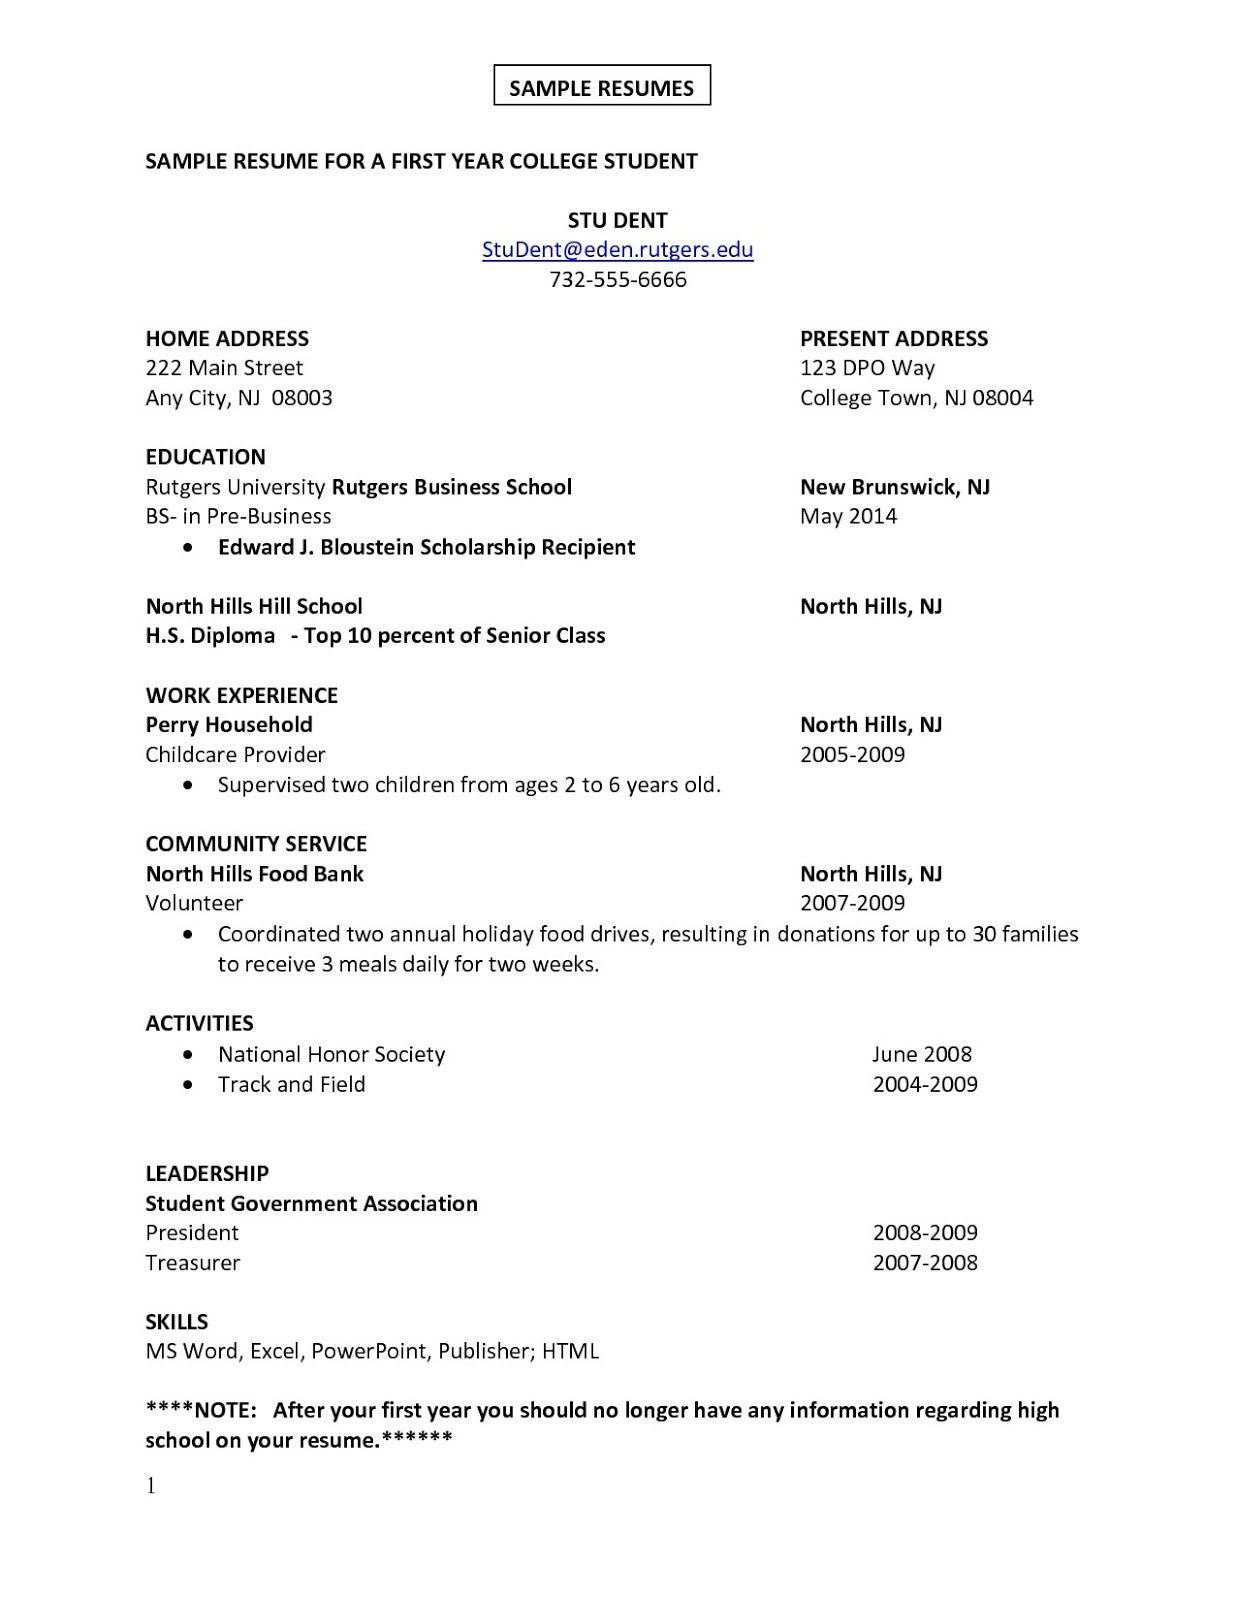 Best Resume Template for First Job First Job Sample Resume Sample Resumes First Job Resume, Job …